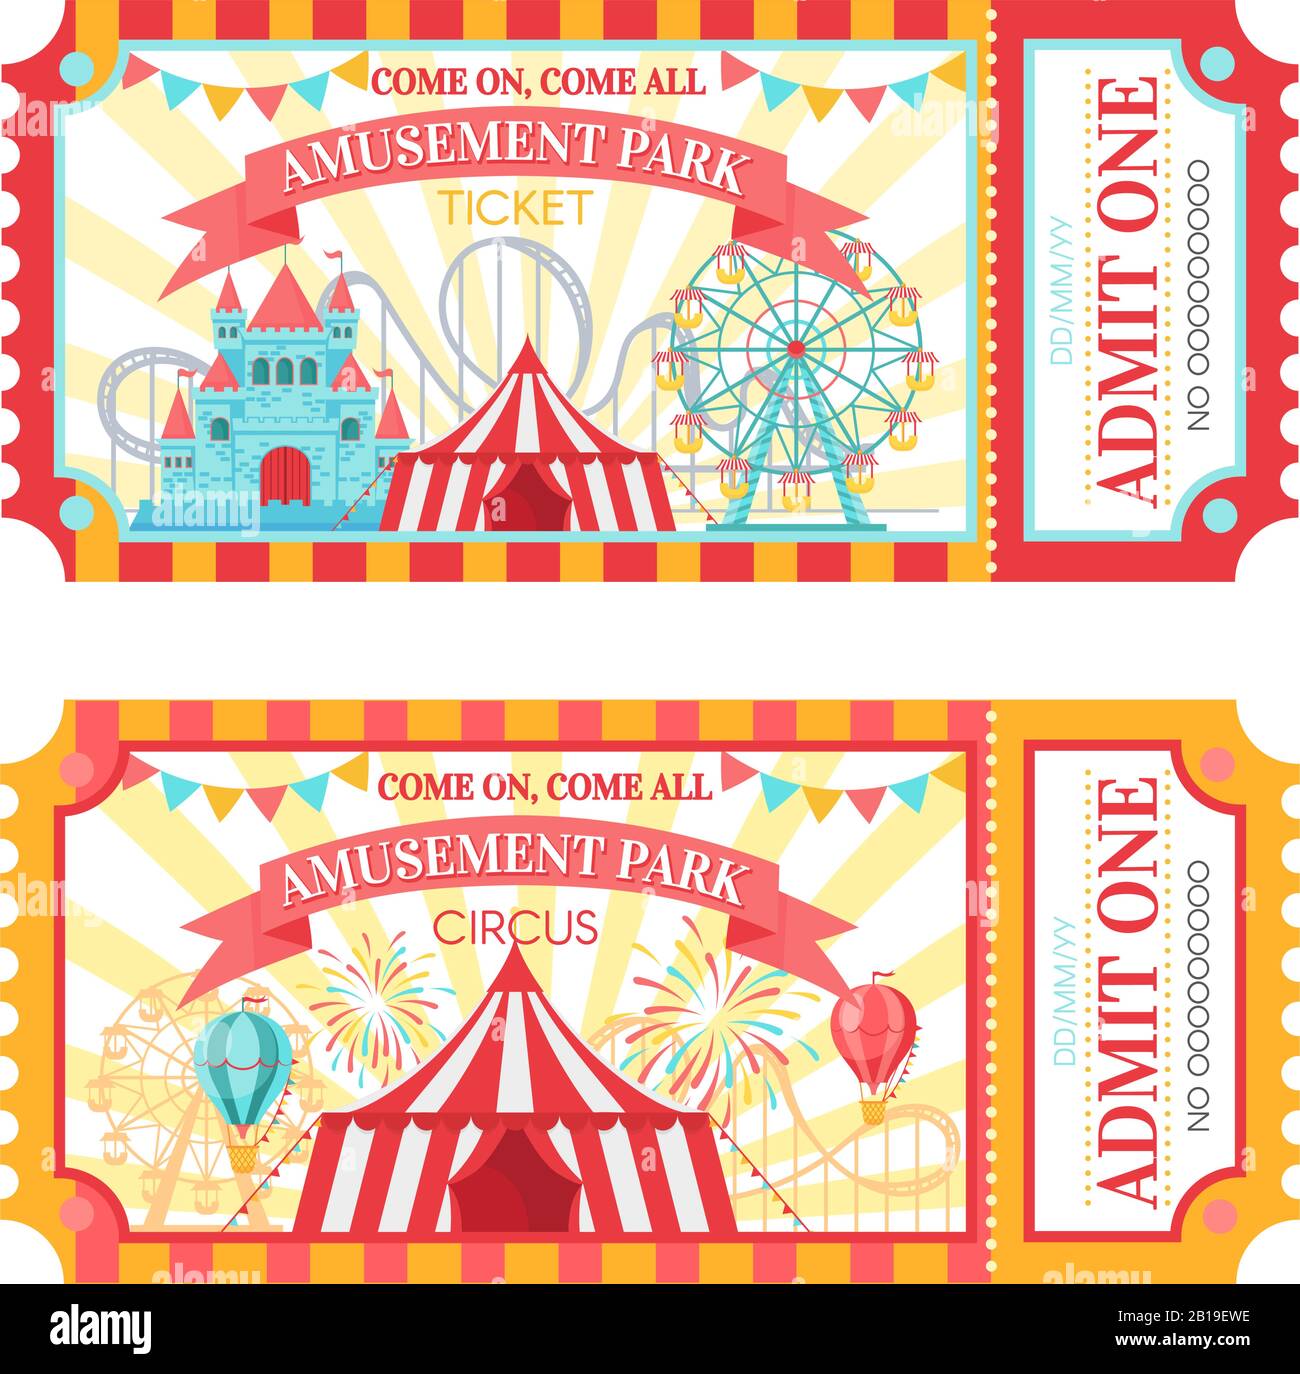 Amusement park ticket. Admit one circus admission tickets, family park attractions festival and amusing fairground vector illustration Stock Vector